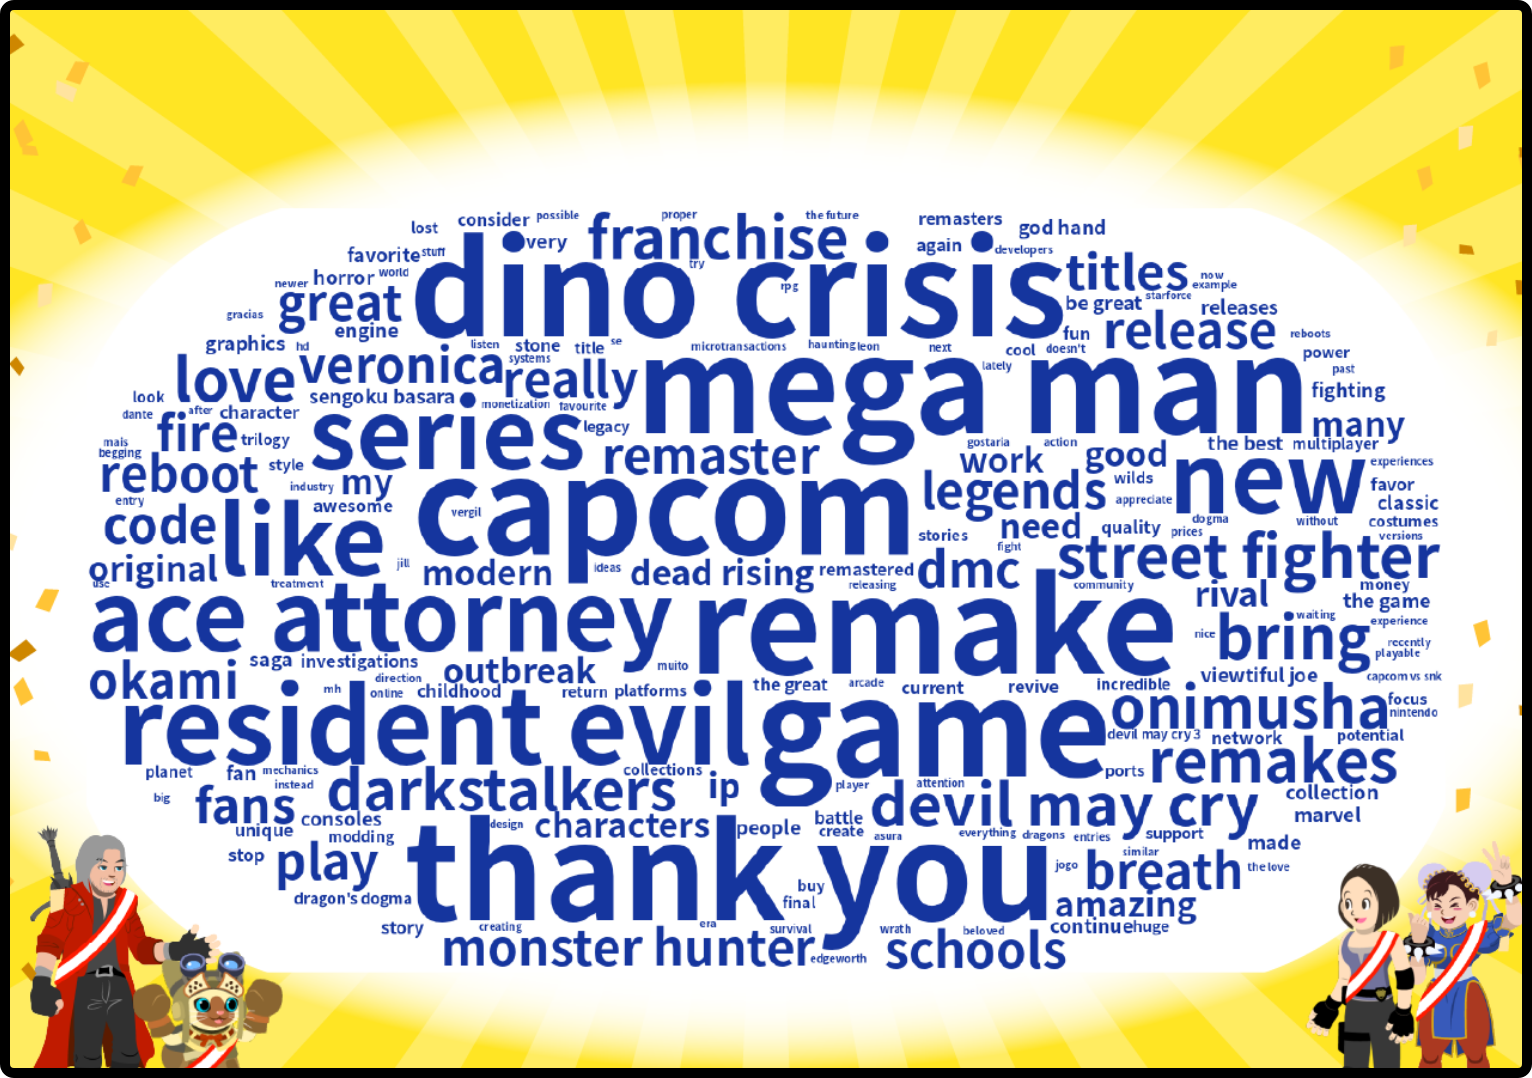 Capcom Fans Want To See Dino Crisis And Mega Man Remake Or Sequel According To 200,000 Votes